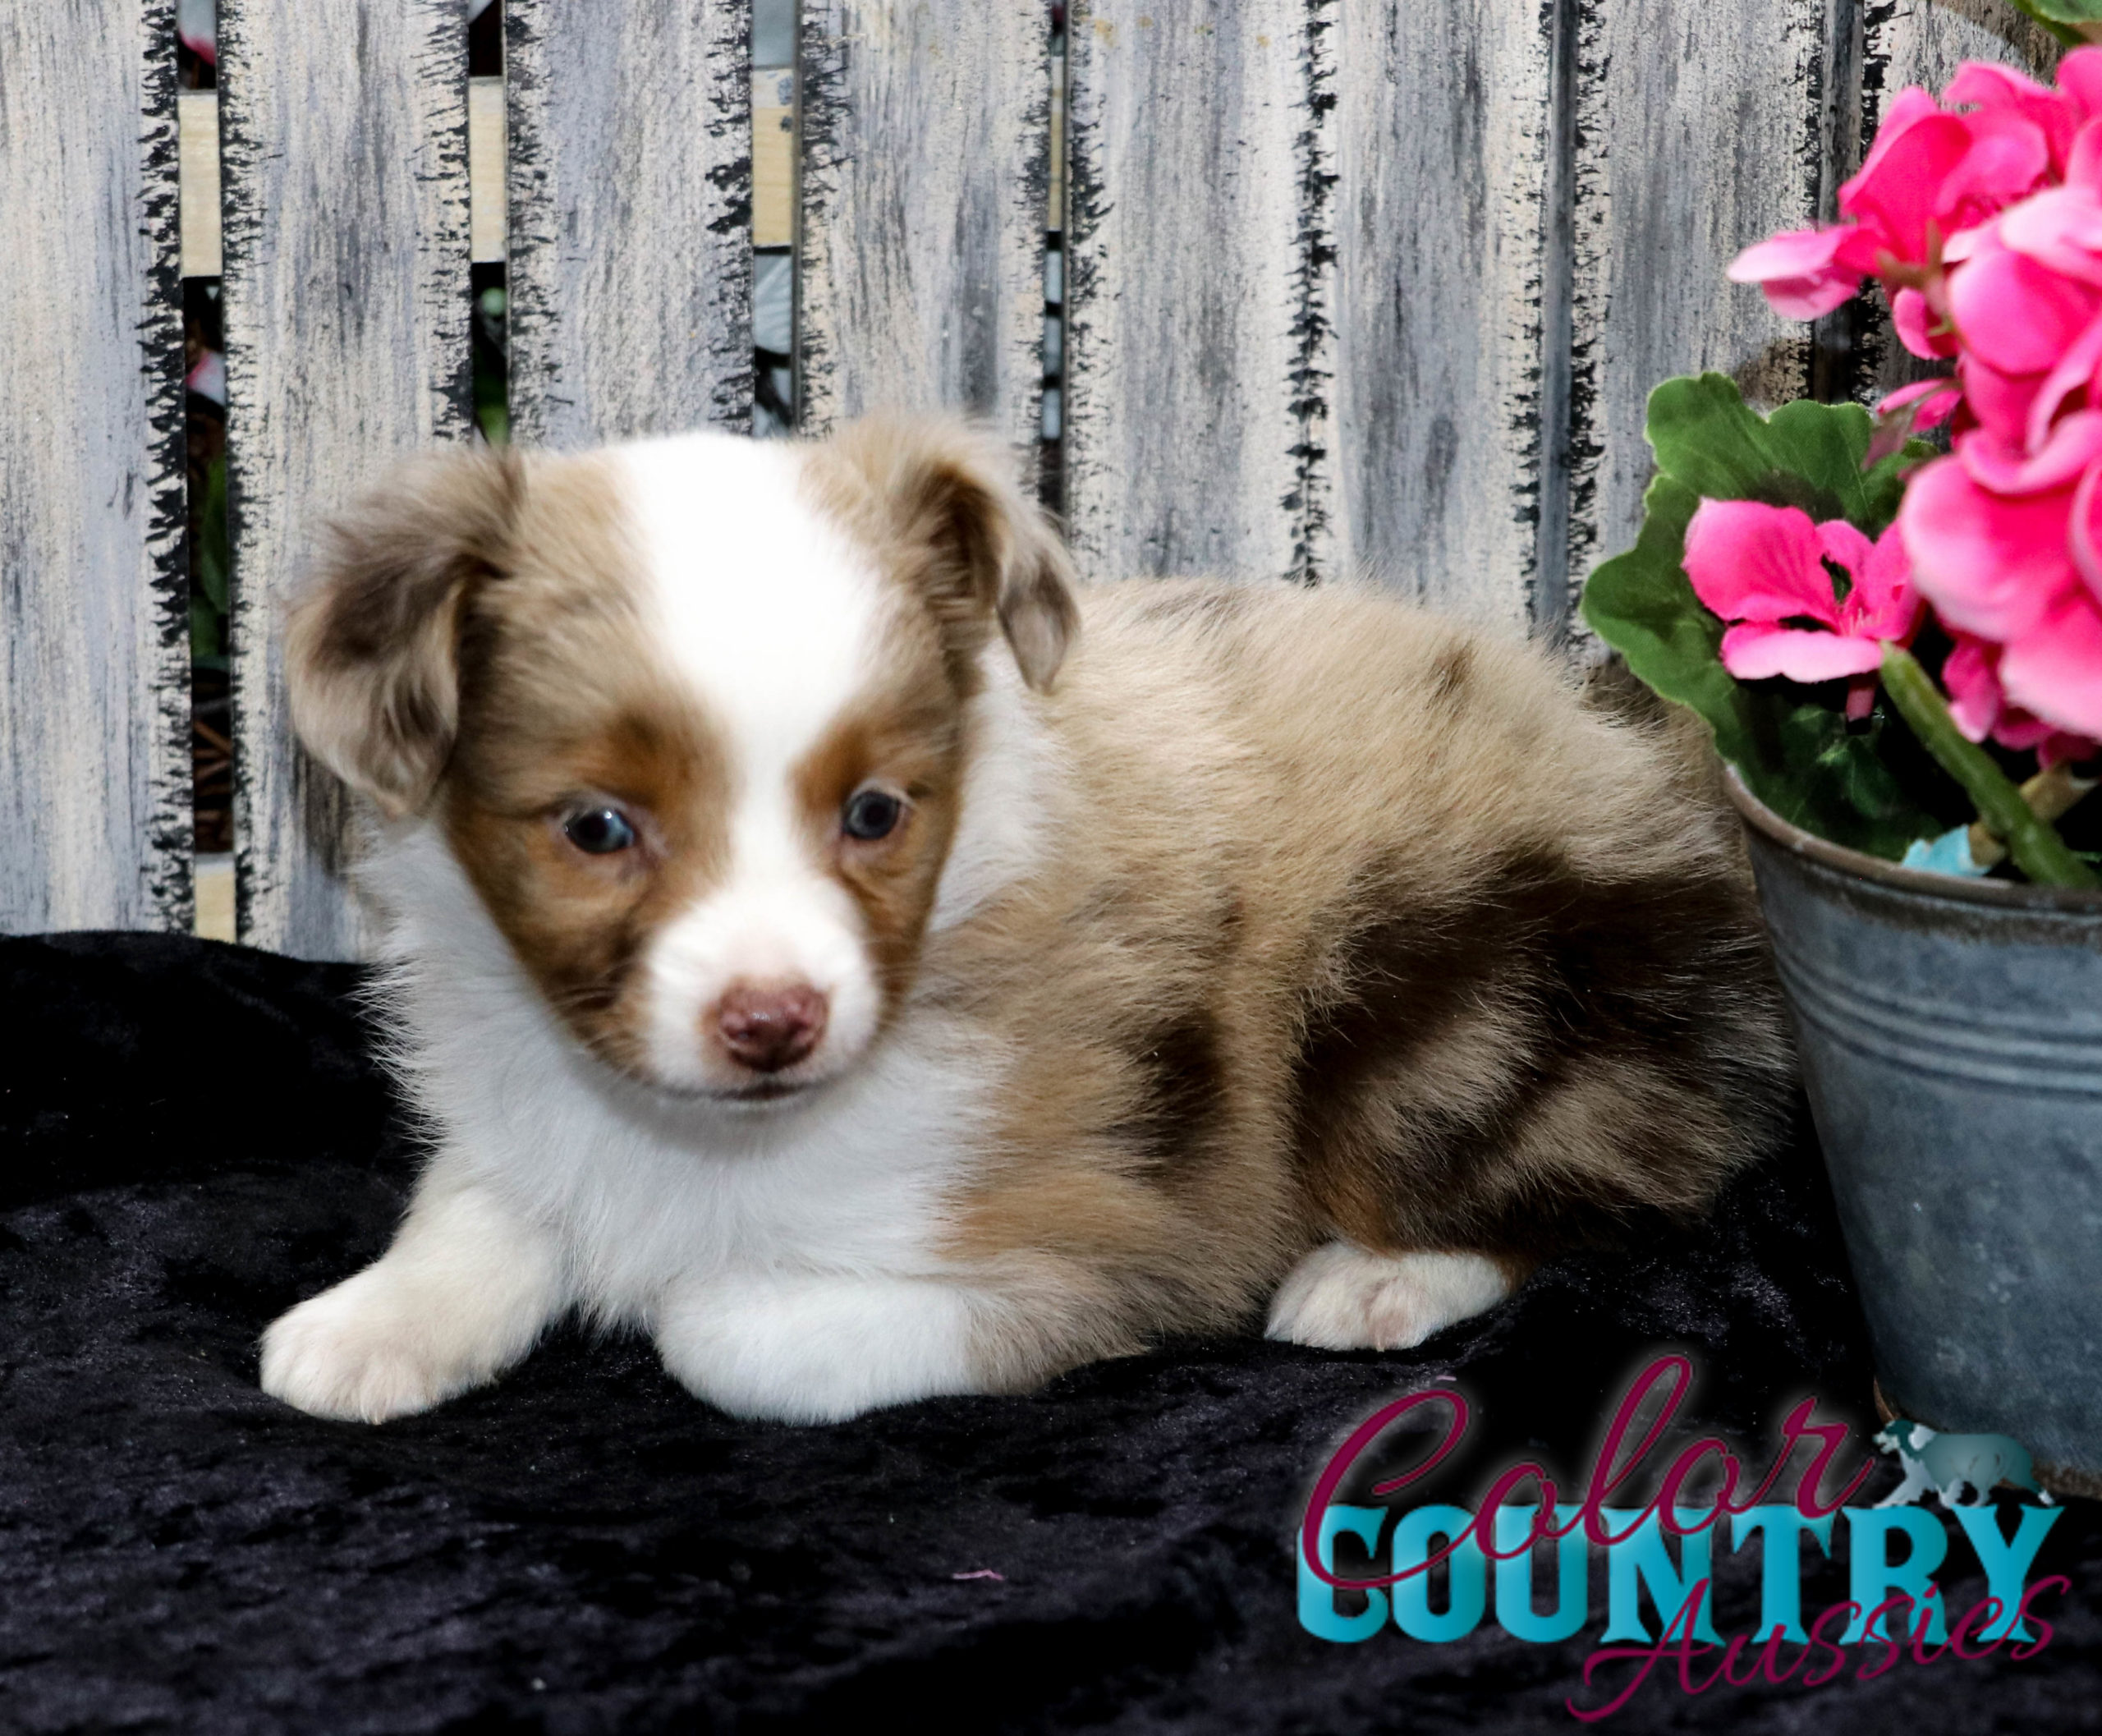 https://colorcountryaussies.com/wp-content/uploads/2021/03/Ferrini-red-merle-toy-aussie-female-Toy-aussie-red-merle-female-for-sale-Color-Country-aussies-toy-aussies-10-scaled.jpg